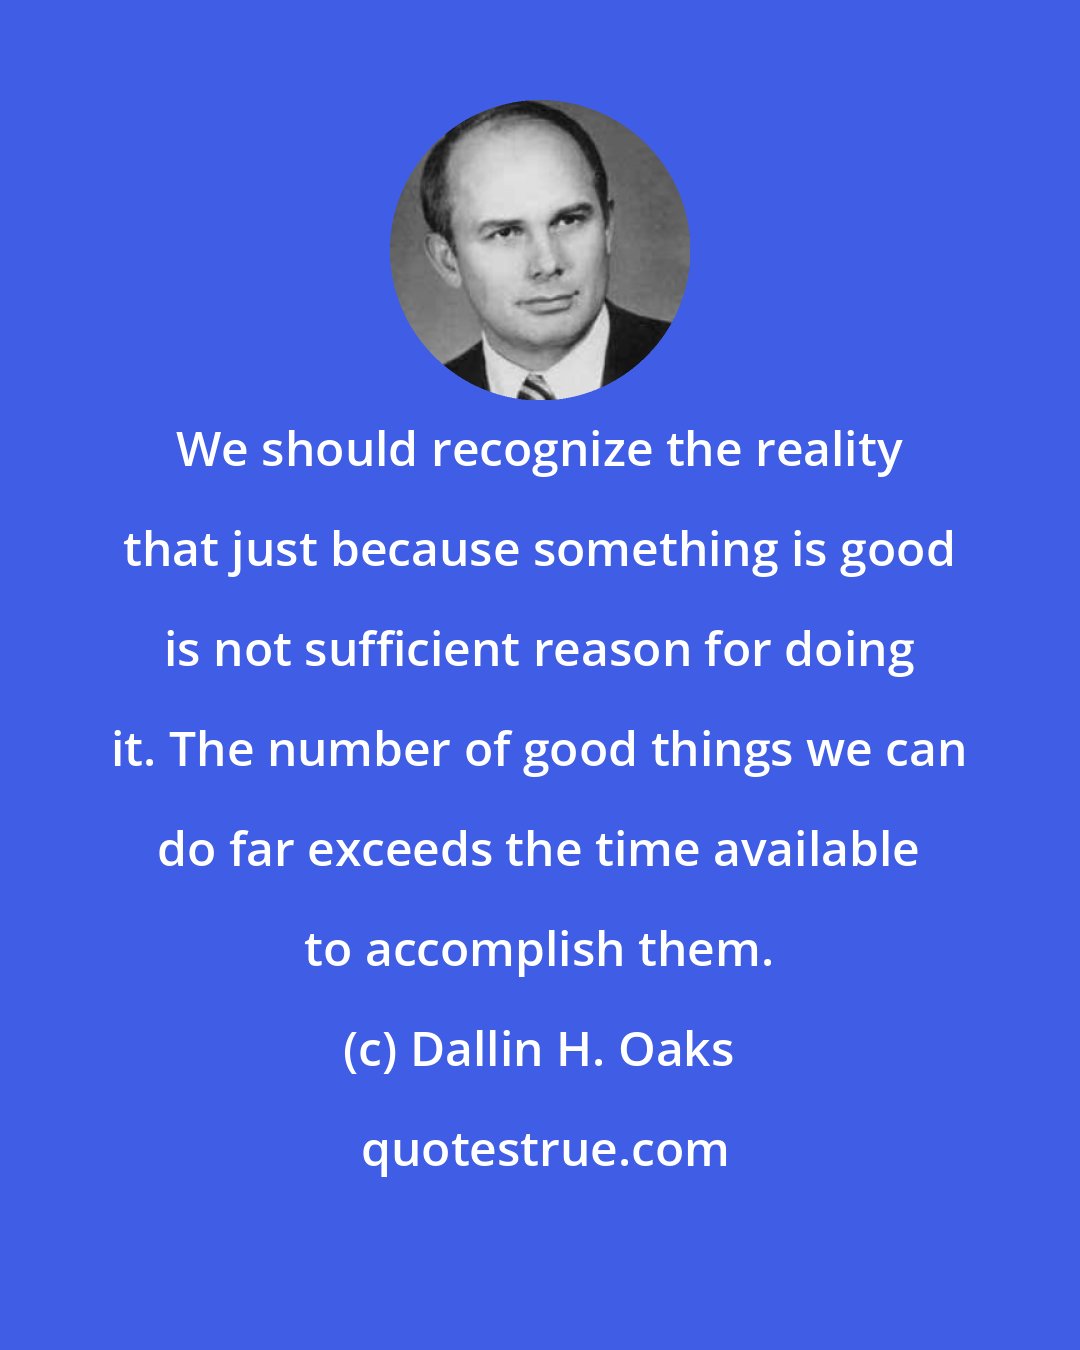 Dallin H. Oaks: We should recognize the reality that just because something is good is not sufficient reason for doing it. The number of good things we can do far exceeds the time available to accomplish them.